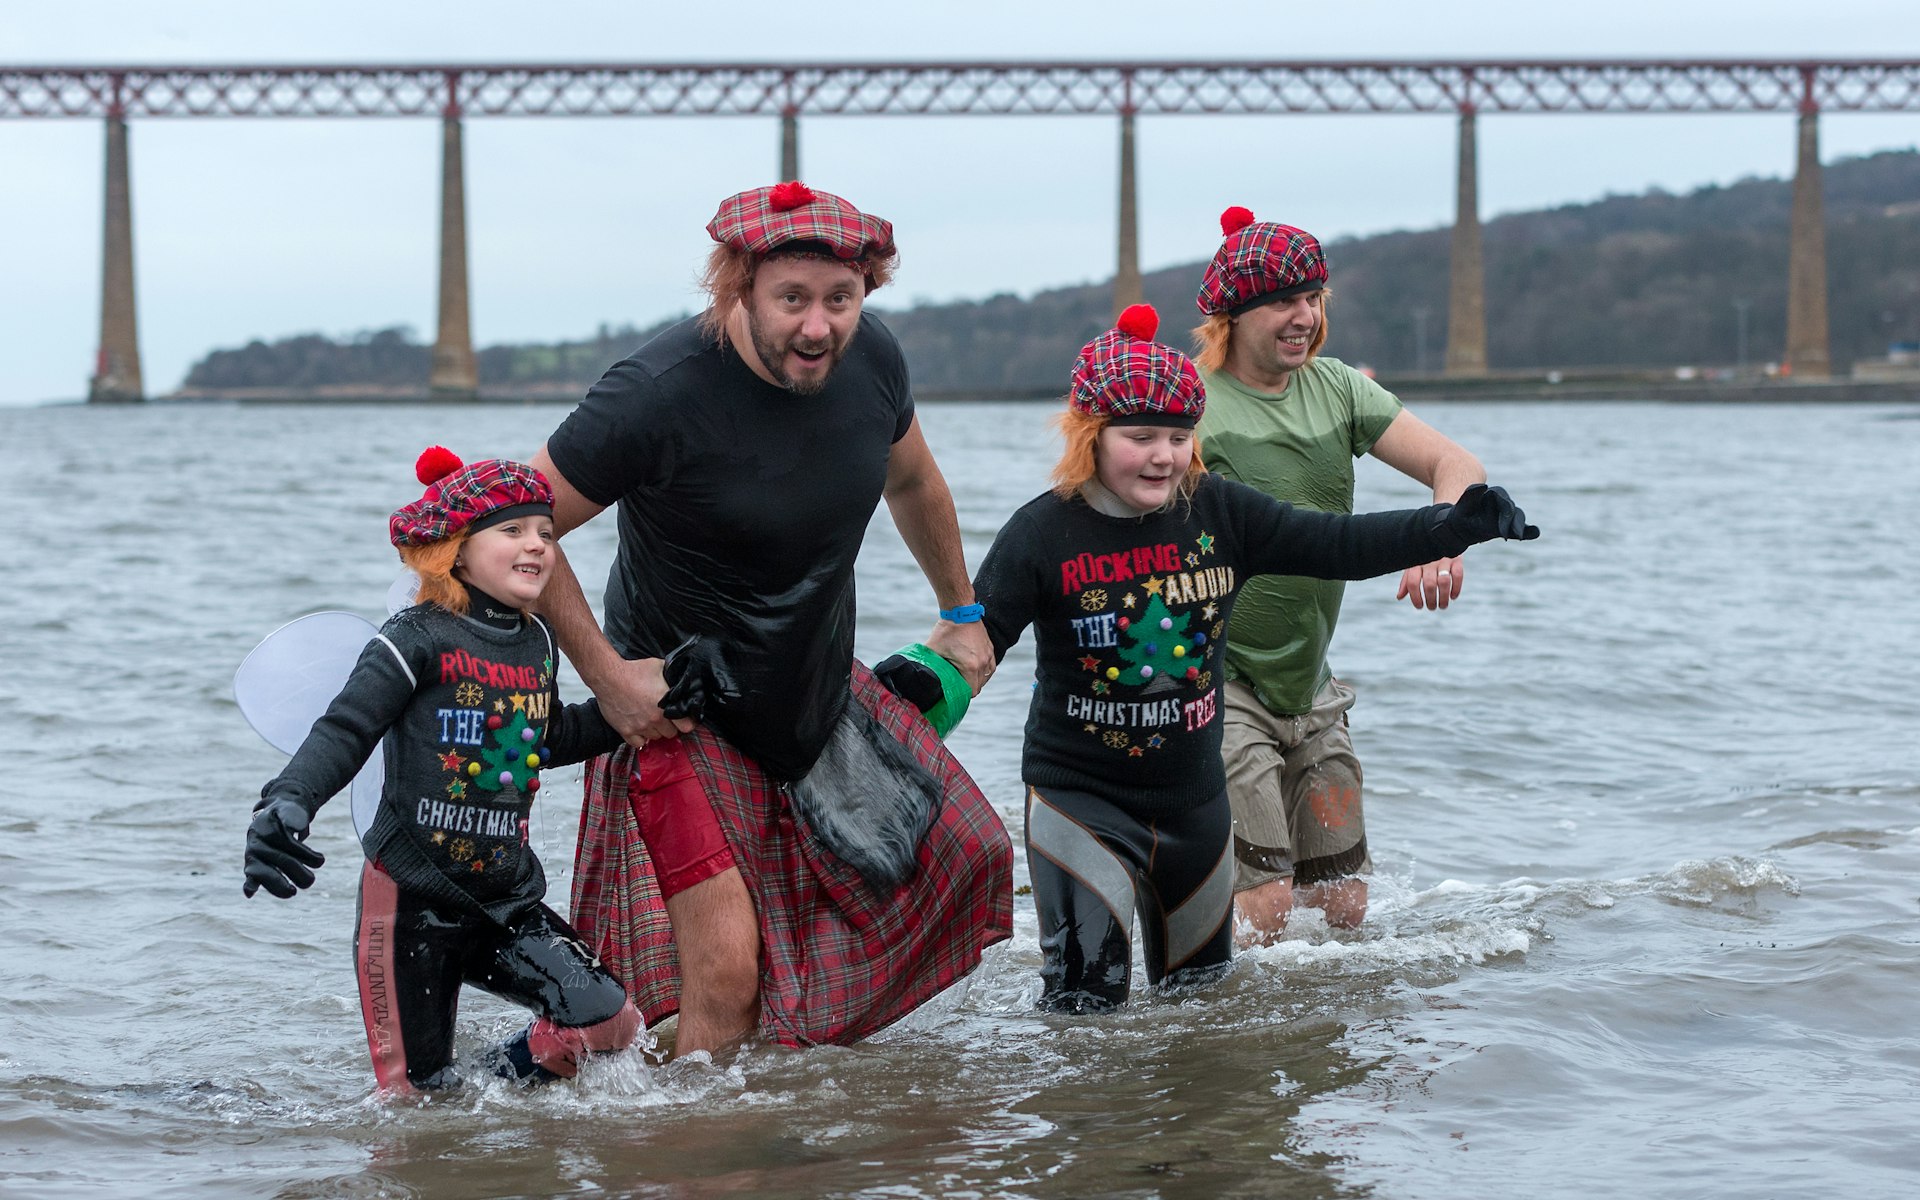 Two men and two children in tartan tams wade into the water for the Annual Loony Dook on New Year’s Day (after Hogmanay) in South Queensferry, Edinburgh